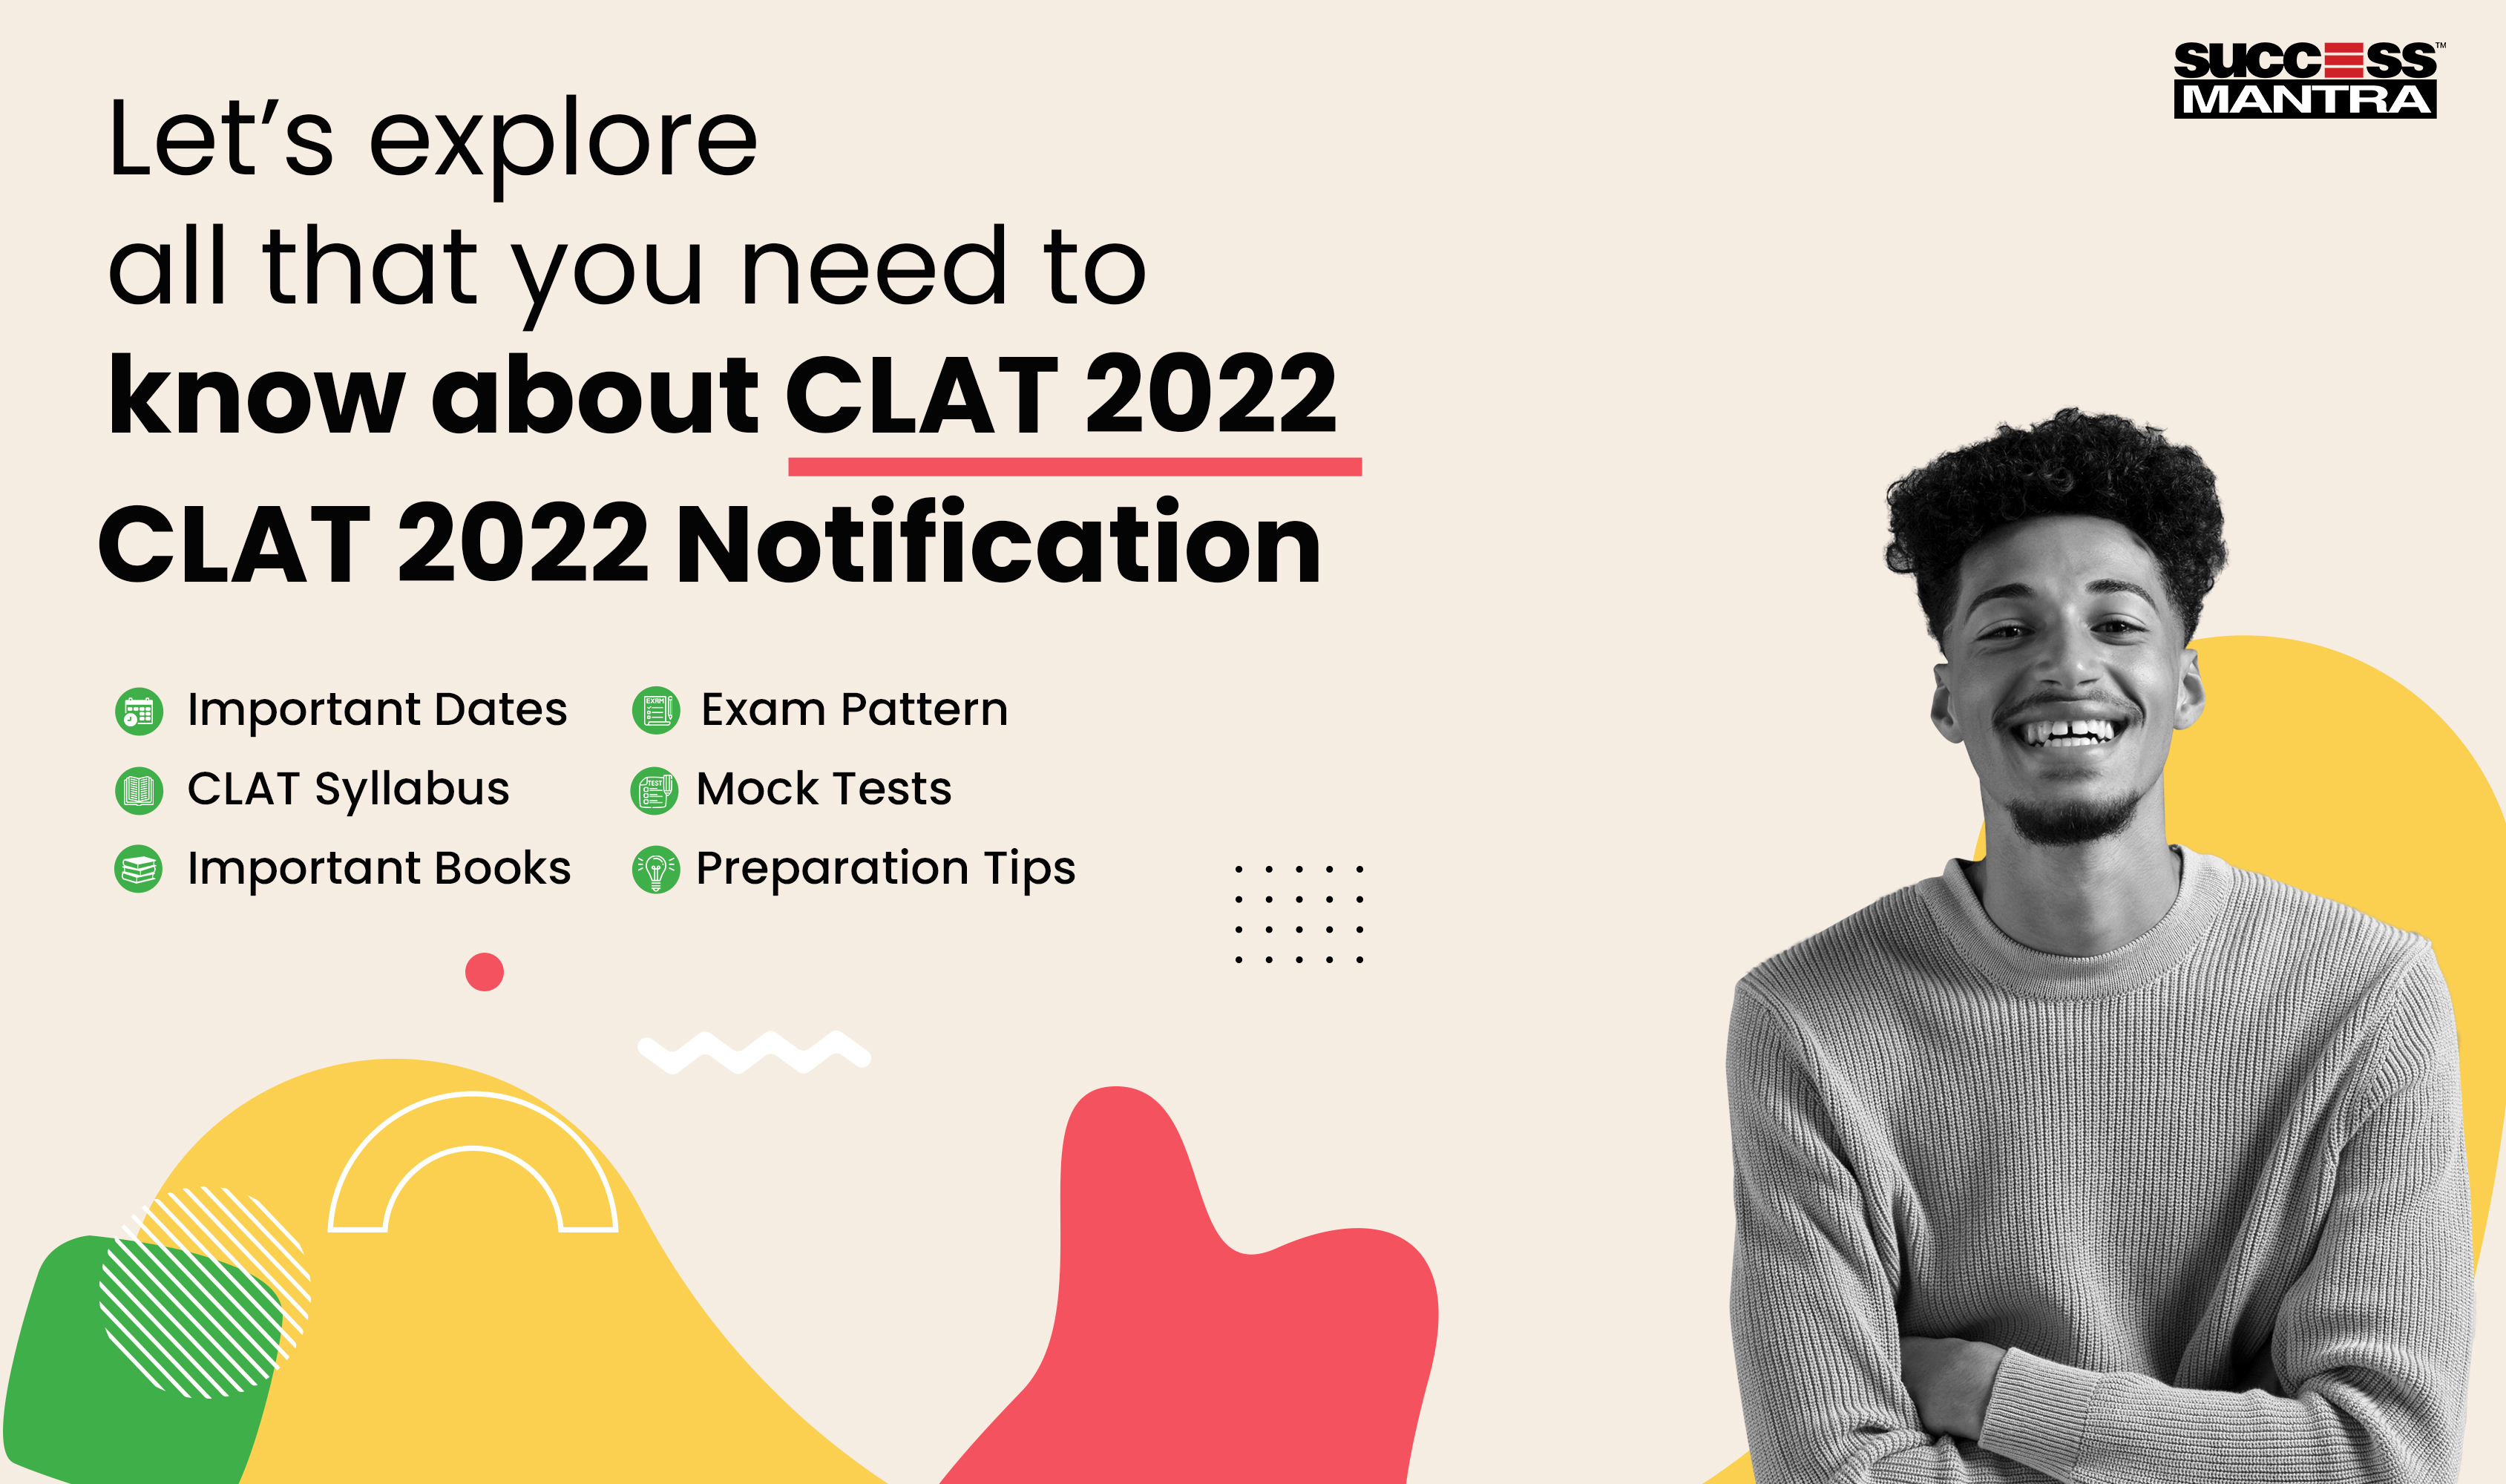 Let’s explore all that you need to know about CLAT 2023